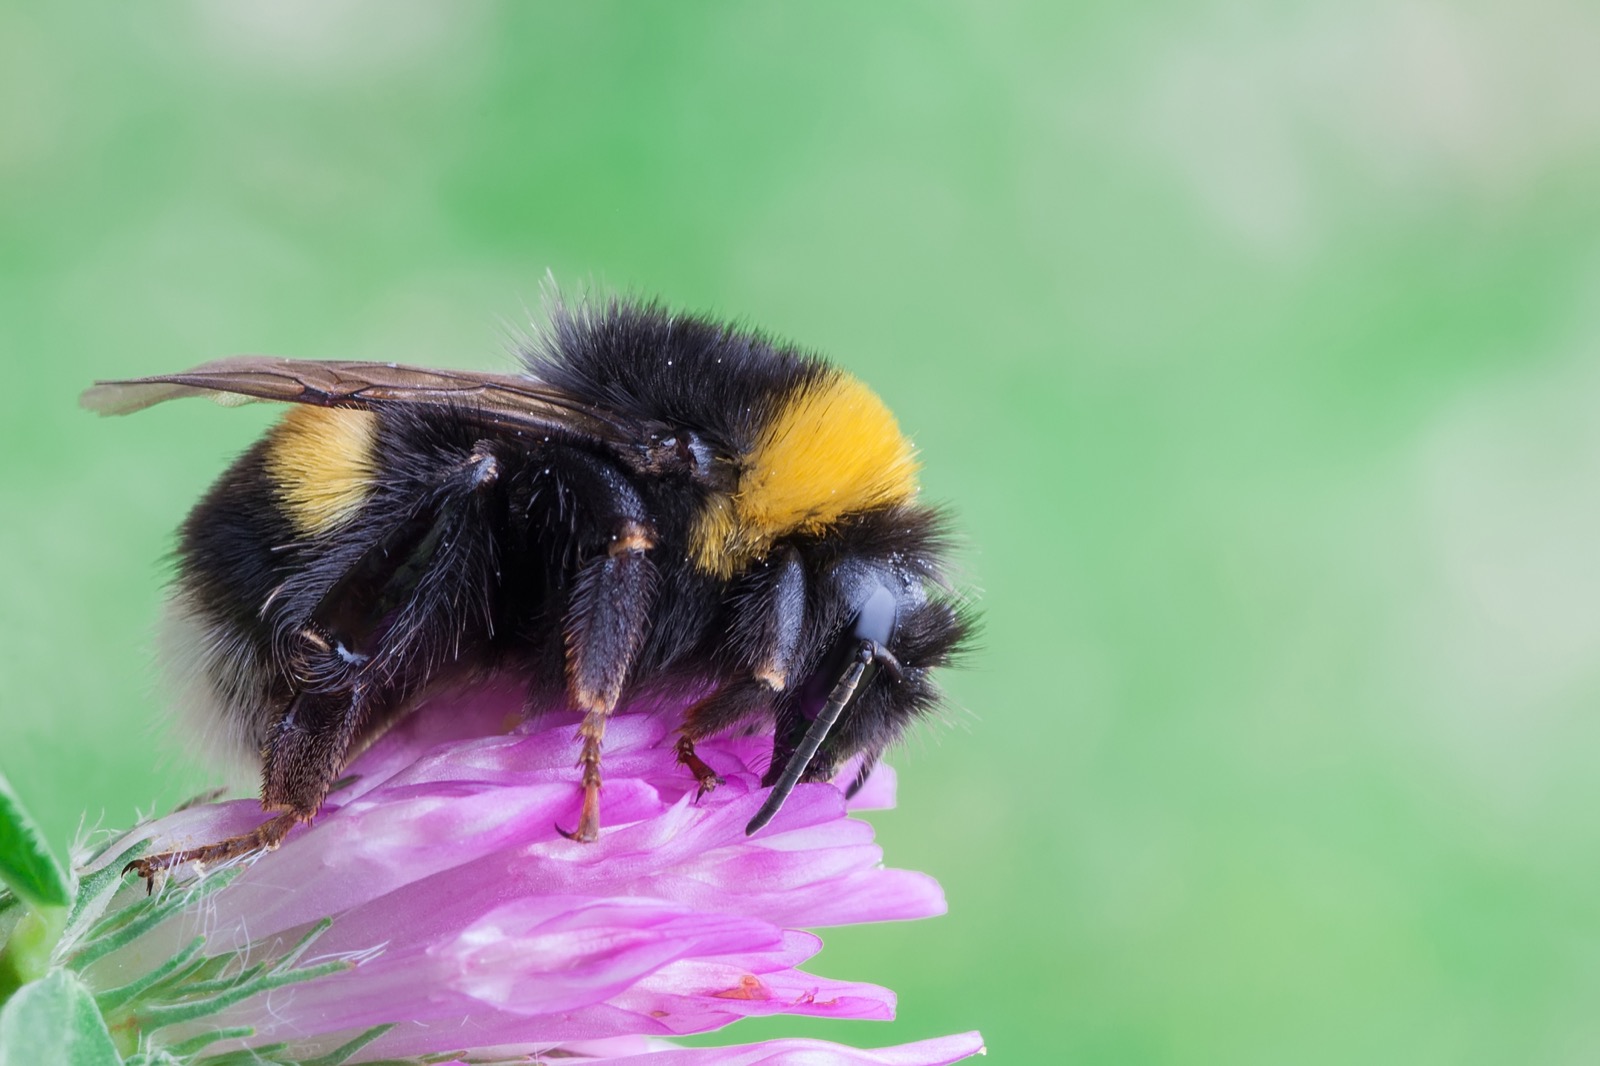 a fuzzy bumblebee settles on a pink flower